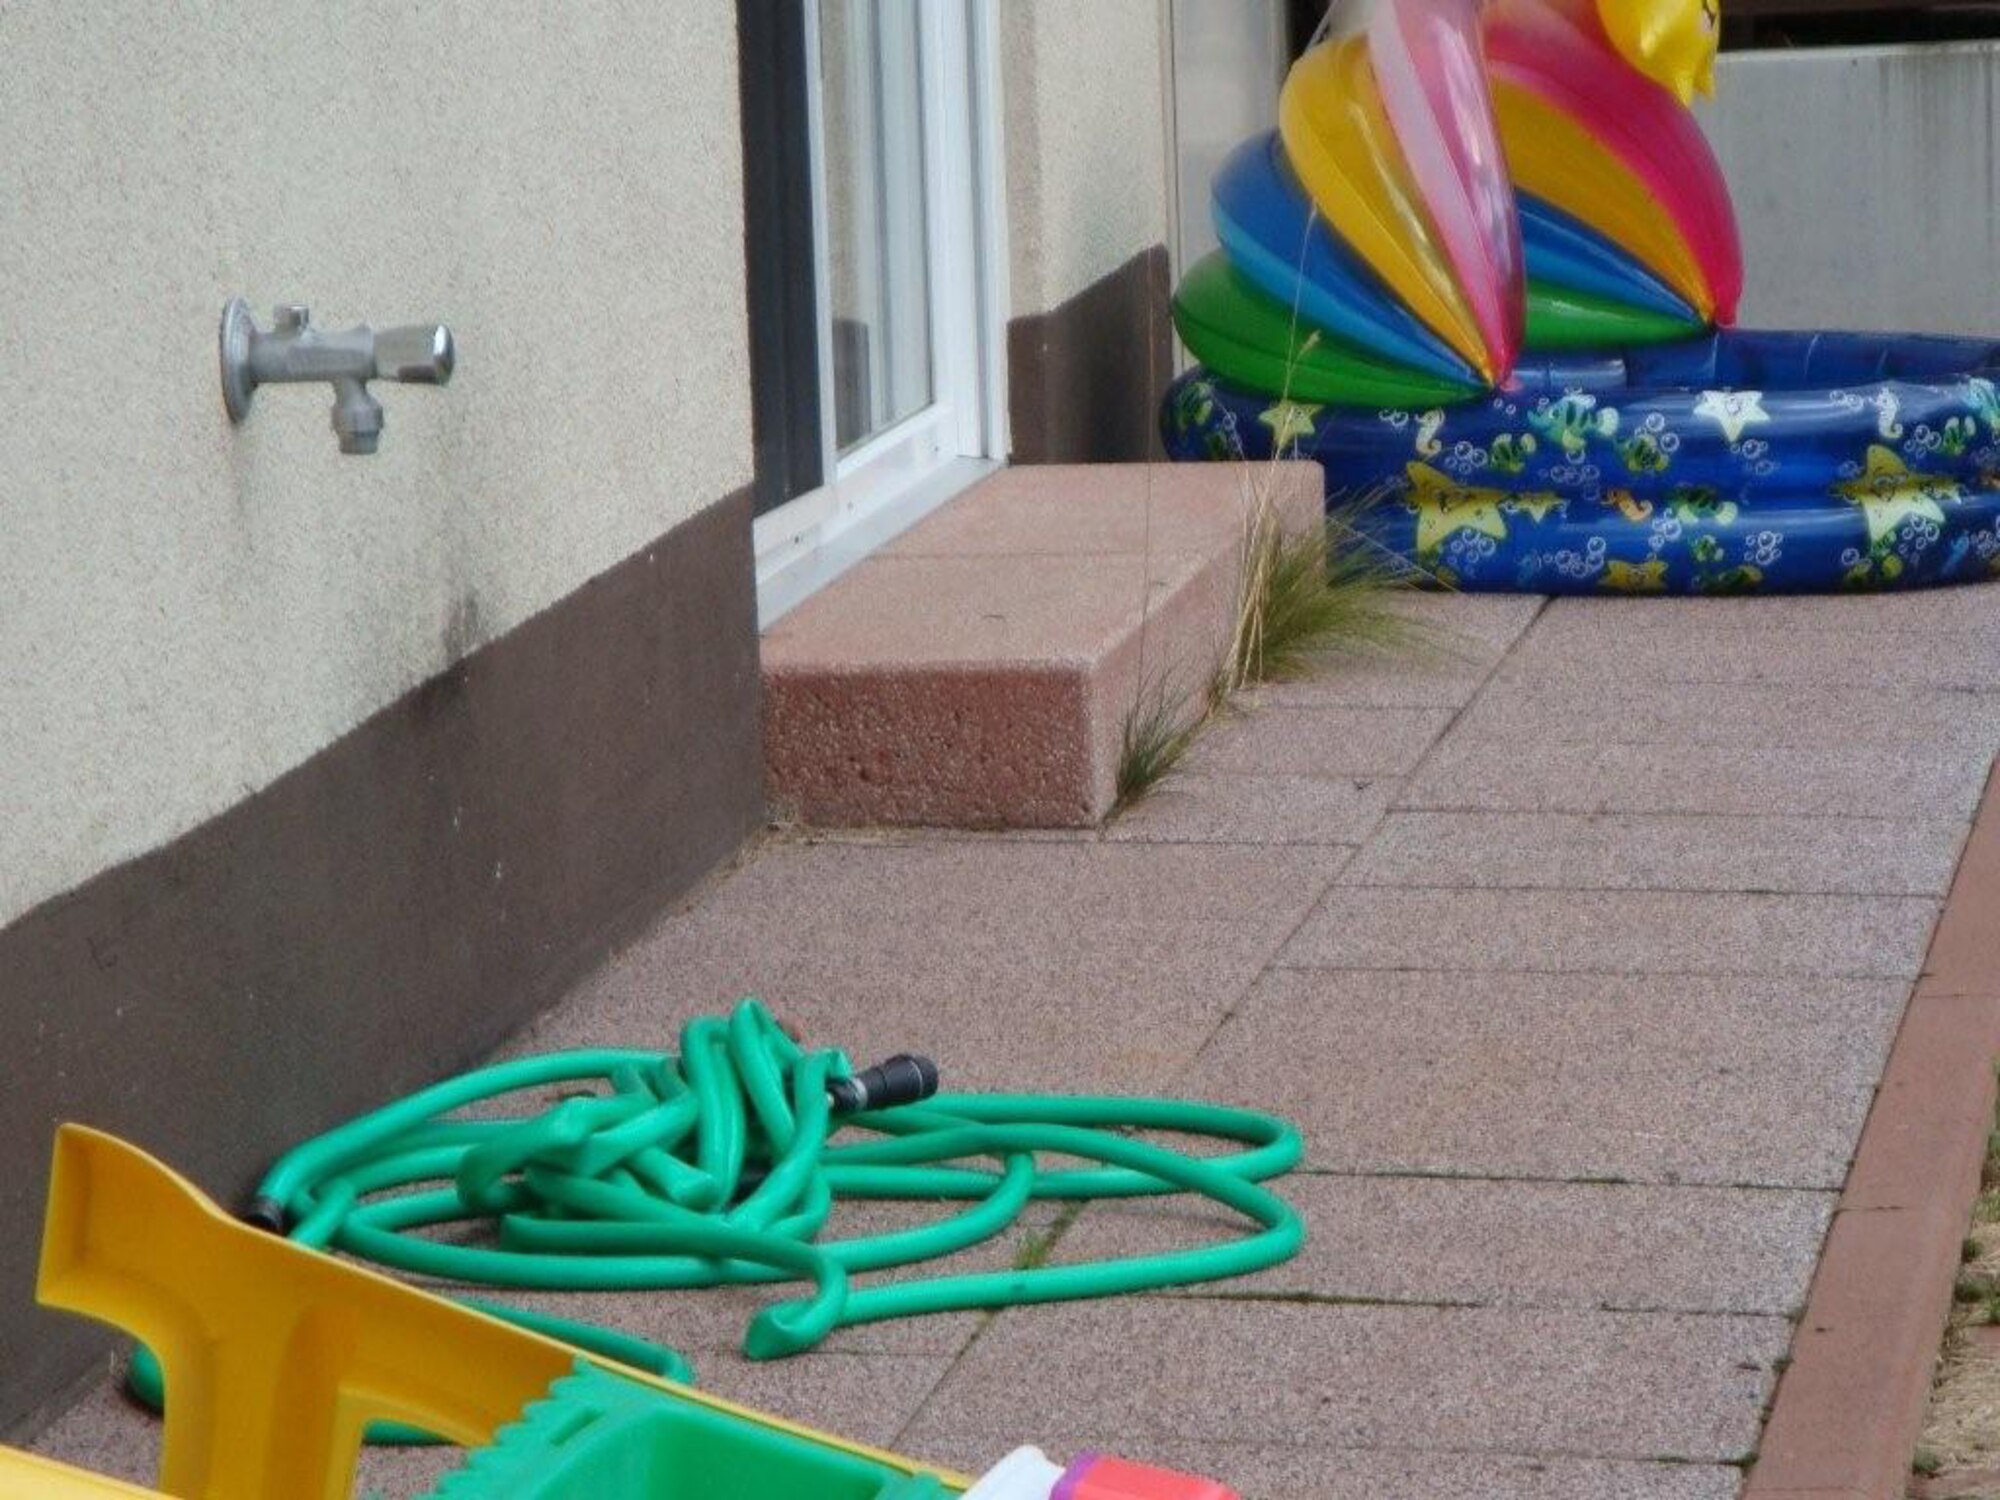 Toys and a waterhose sit outside in the yard of a base house in the Kaiserslautern Military Community housing area. Recently, during weekly exterior inspections, it has been noticed that some residents are not keeping their homes and yards up to standard. All toys are to be stored in neat fashion and hoses are to be rolled up neatly. (Courtesy photo)